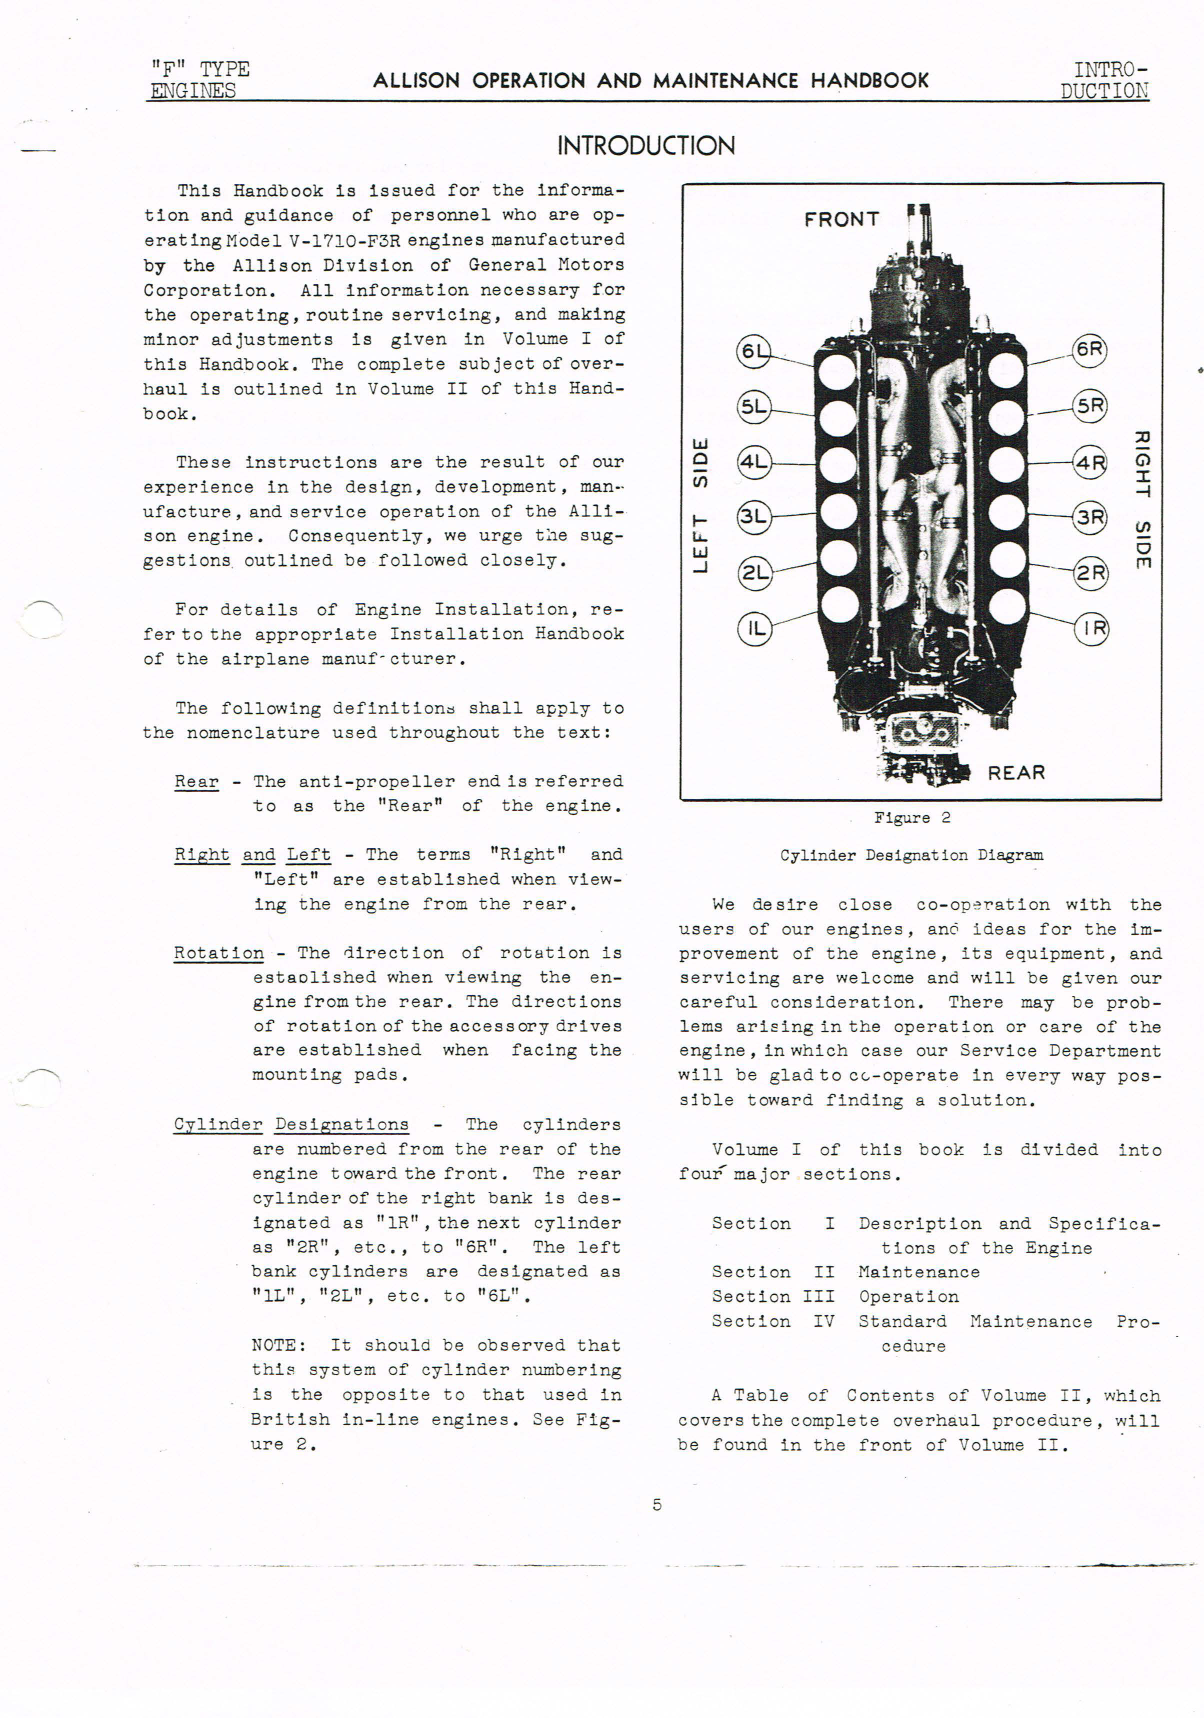 Sample page 8 from AirCorps Library document: Operation, Maintenance and Overhaul for Allison V-1710-F Engines